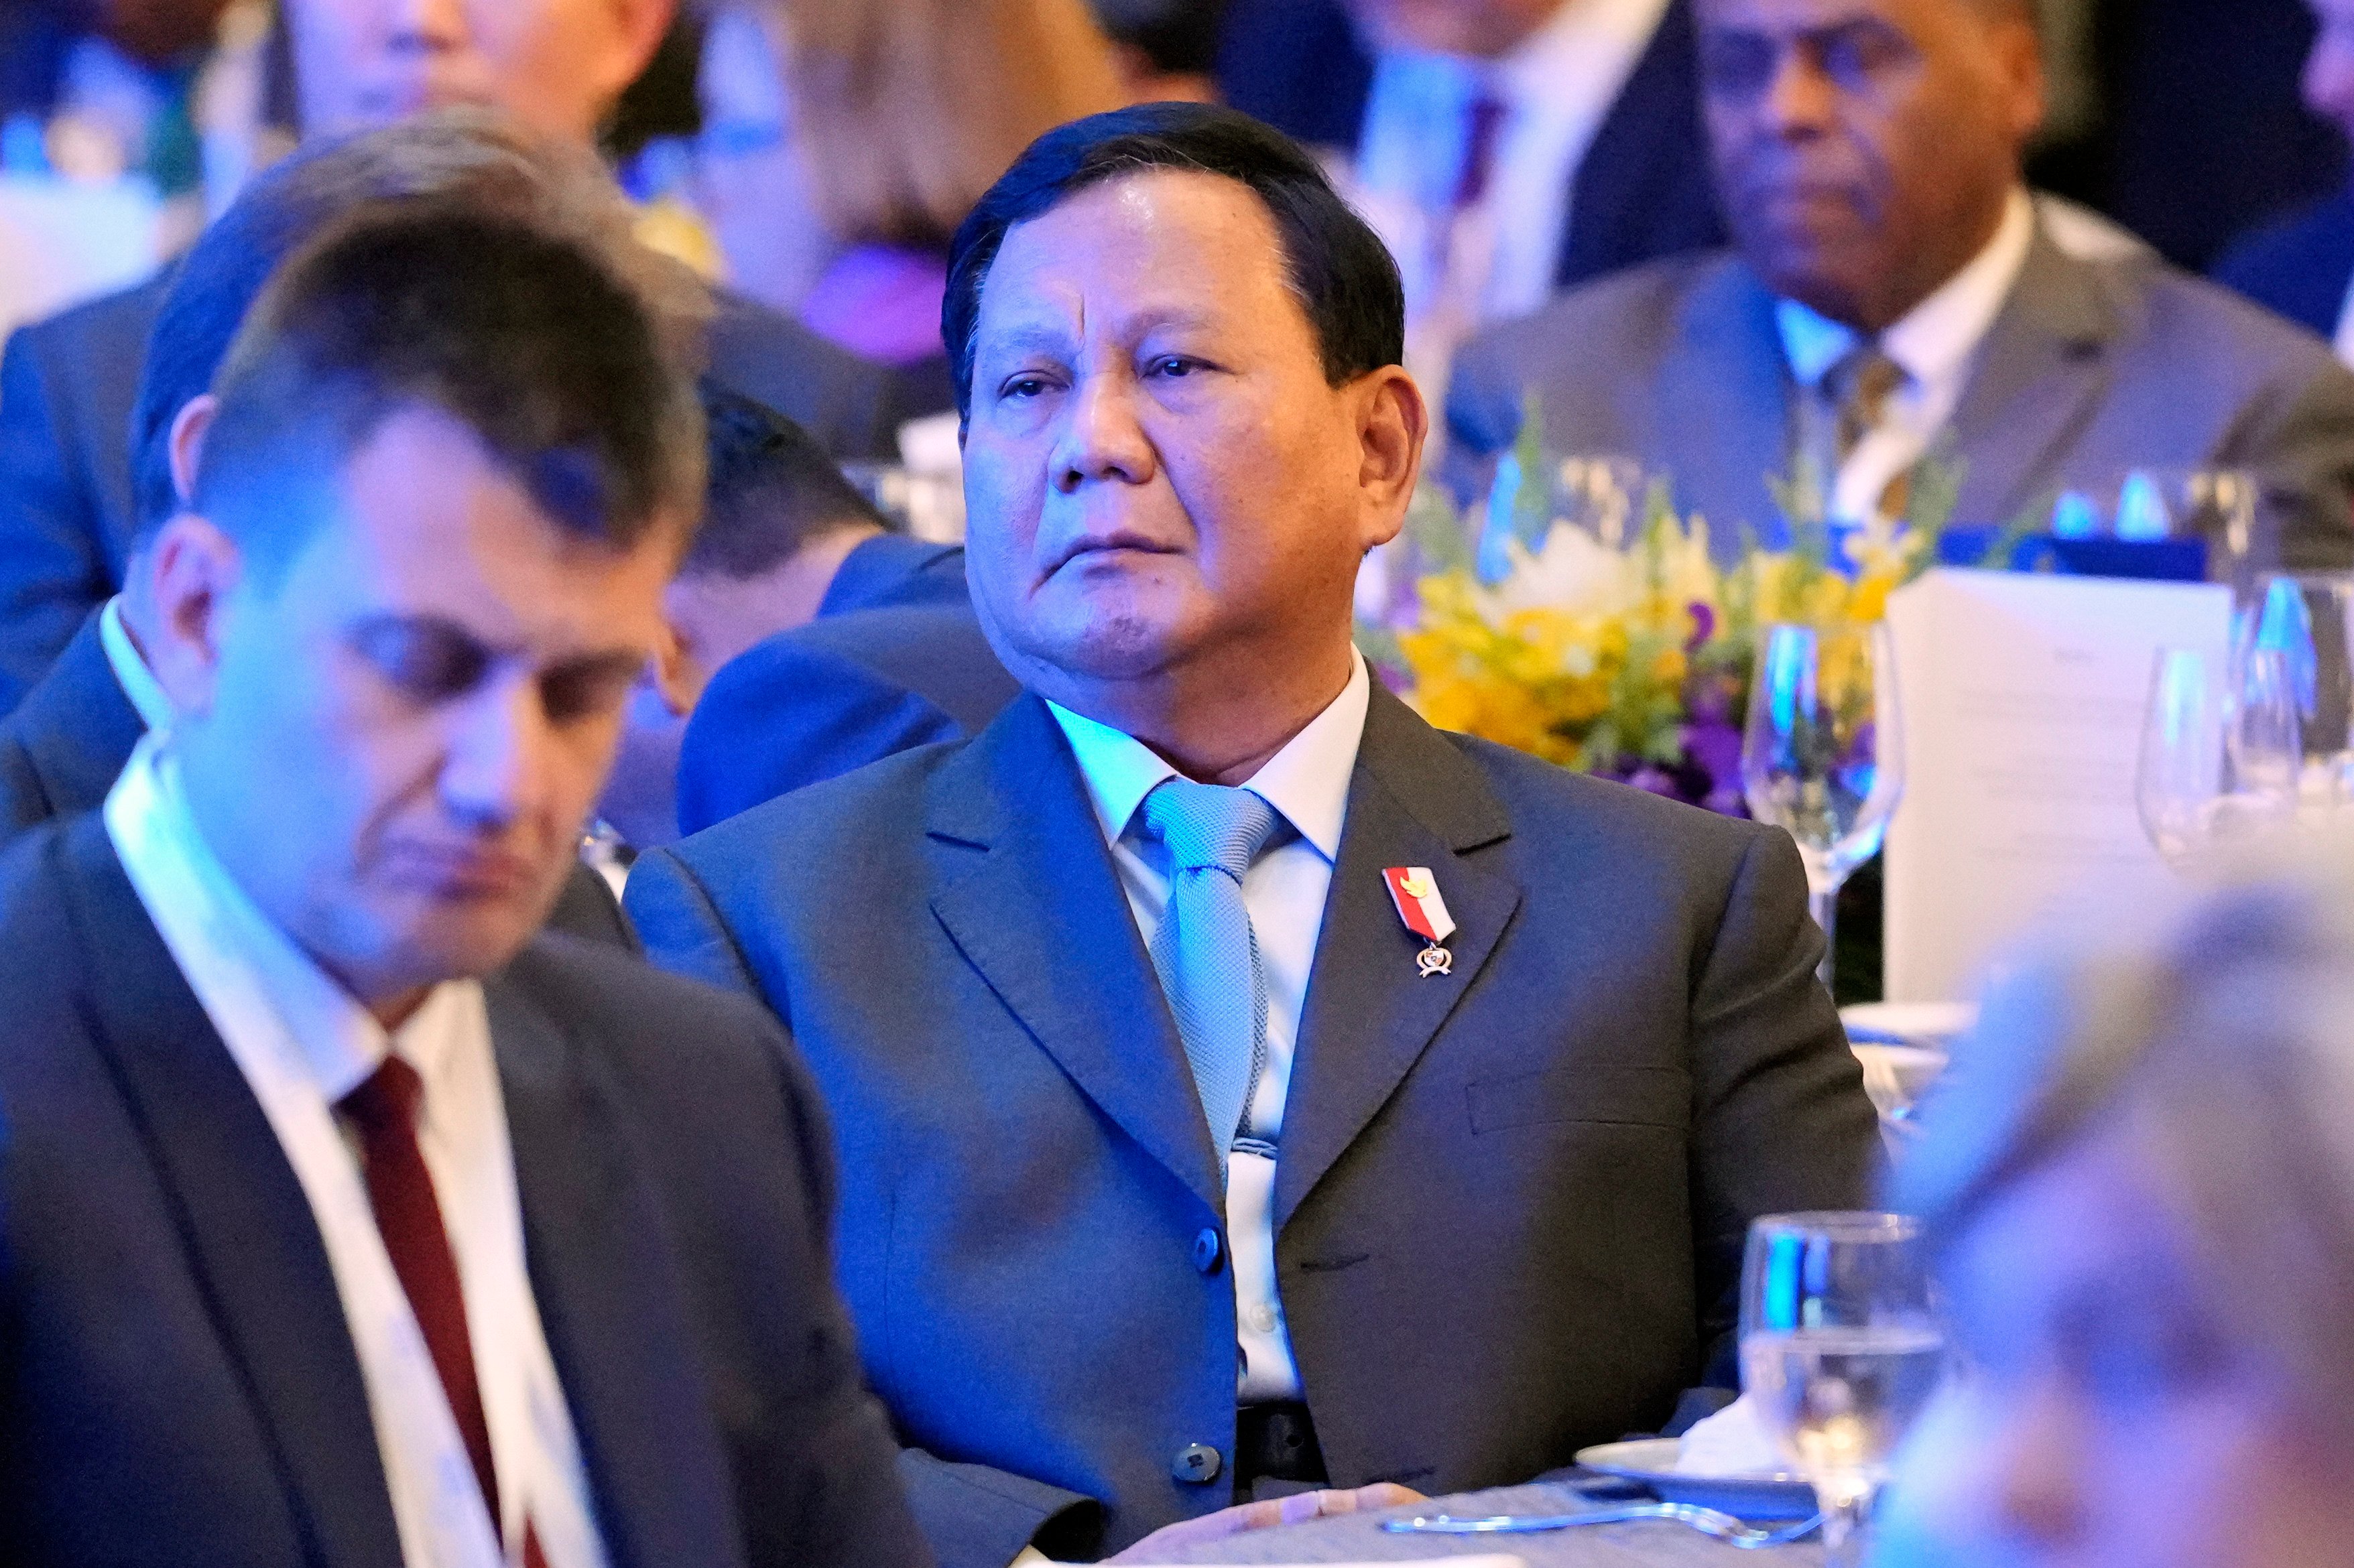 Indonesia’s president-elect Prabowo Subianto attends the opening ceremony for the 21st Shangri-La Dialogue summit in Singapore. Photo: AP